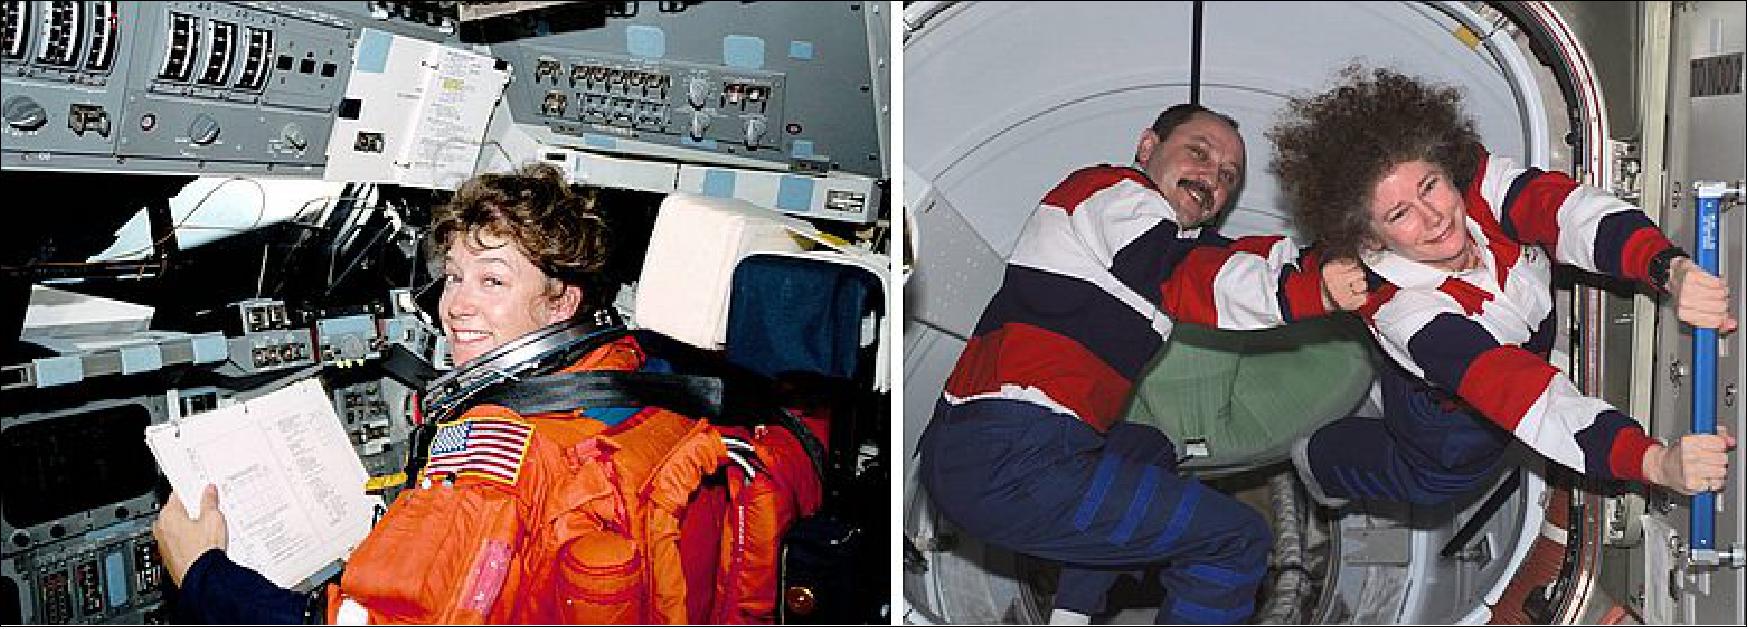 Figure 98: Left: STS-92 Pilot Melroy shortly after reaching orbit. Right: Expedition 2 Commander Yuri V. Usachev (at left) coaxing a reluctant Flight Engineer Helms to leave ISS at the end of their mission (image credit: NASA/JSC)